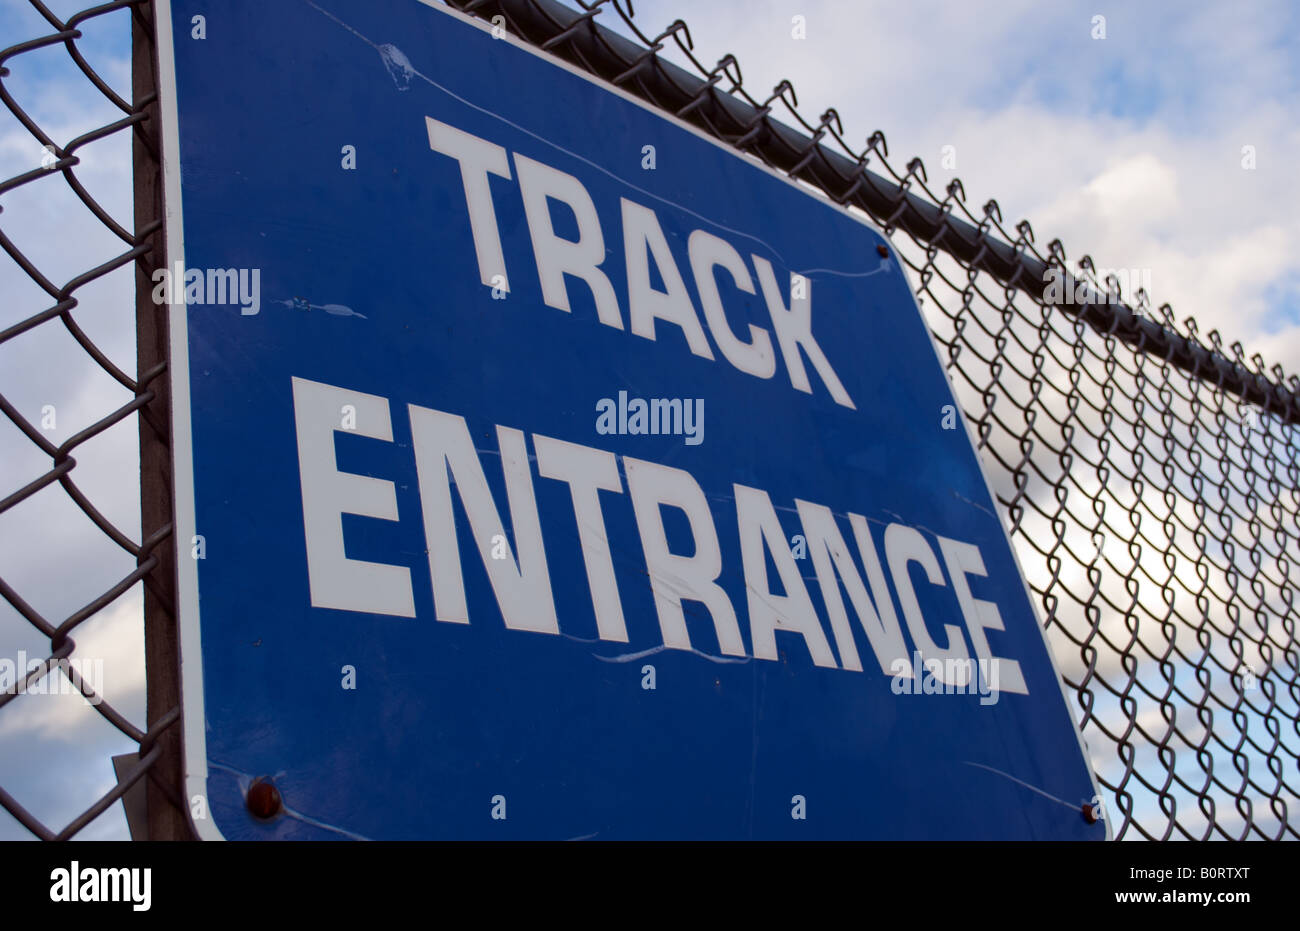 Track and field entrance sign Stock Photo